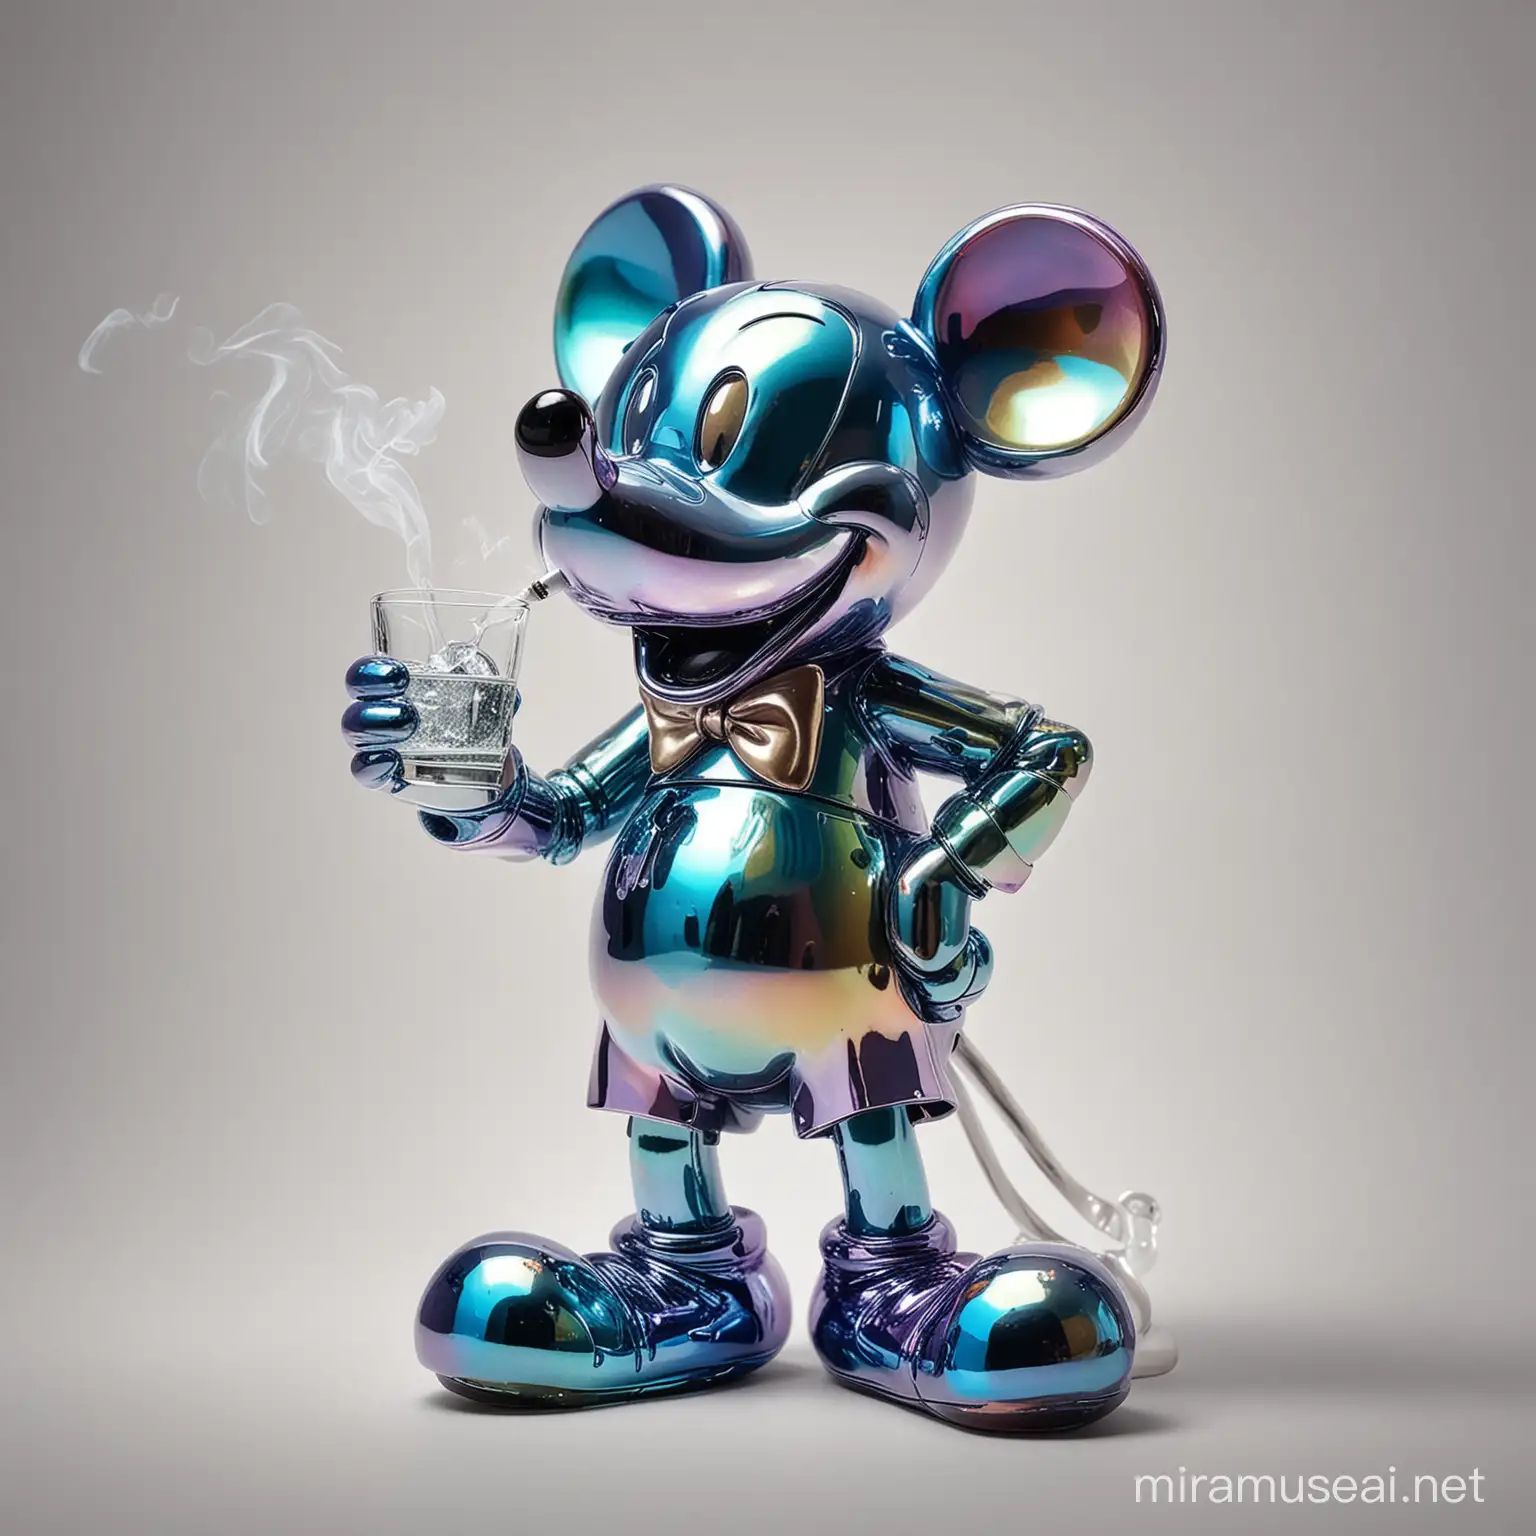 Produce a picture of a shiny strong iridescent Mickey mouse sculpture smoking an drinking gin